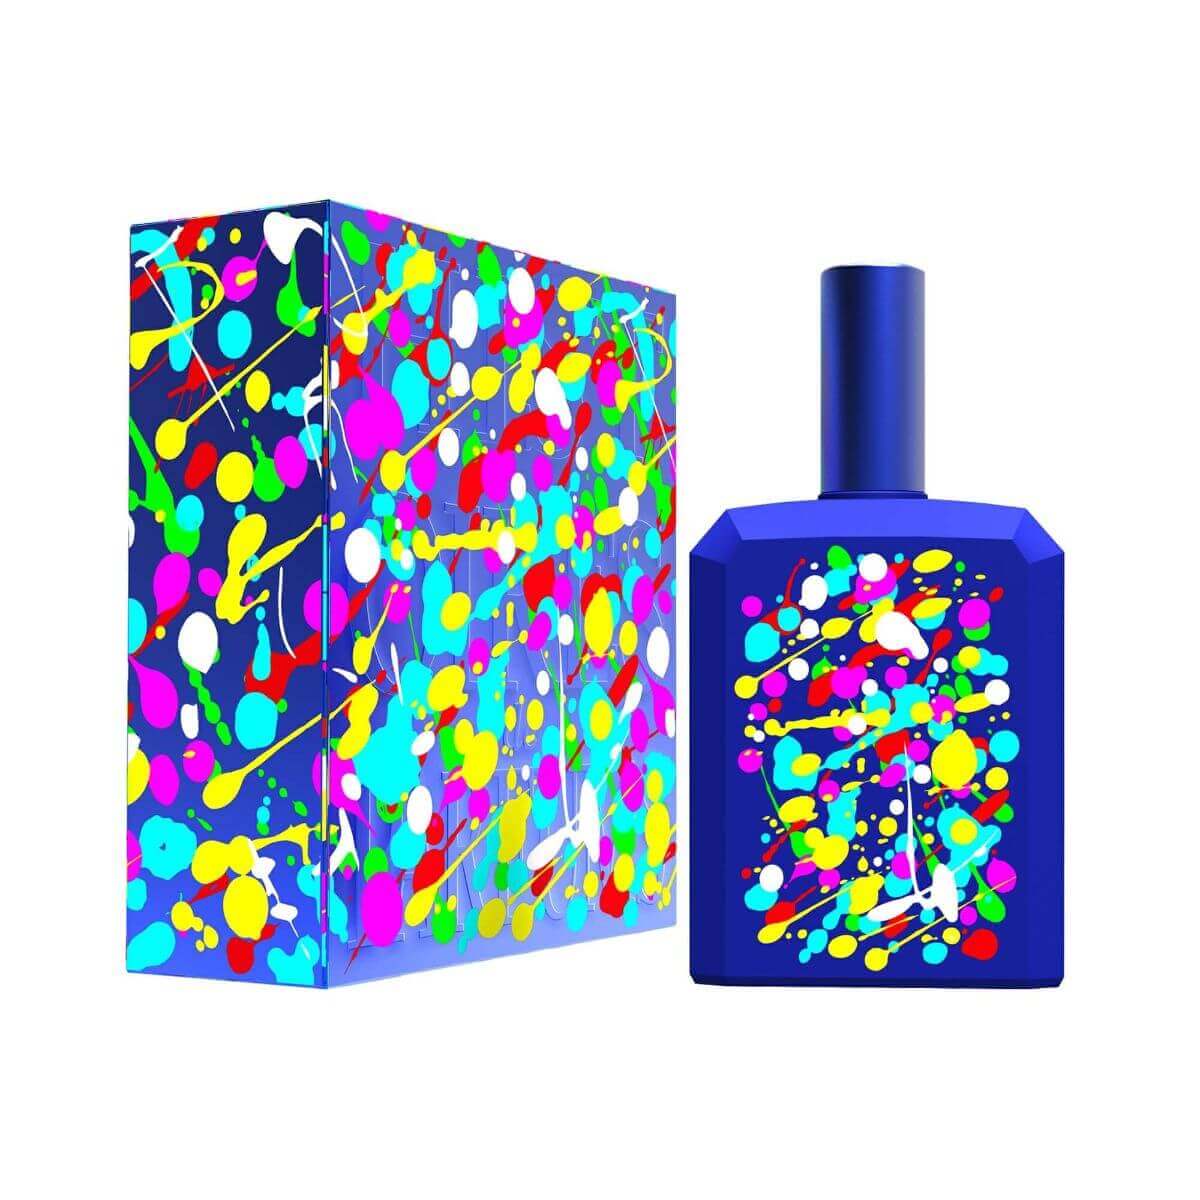 Histoires De Parfum - This Is Not A Blue Bottle 1.2,A Fragrance For Both Women And Men That Brings A Dash Of Colors To Your Life! A Burst Of Colors And A Dose Of Happinessthe Smell Of The Sandalwood, Sweet Lilac And Ylang Ylang Add Light To Your Daythis Is A Perfume Of Light!Top Notes: Pink Pepper, Ivy LeaveHeart Notes: Lilly Of The Valley, Ylang Ylang, LilacBase Notes: Vanilla, White Musk, Sandalwood.